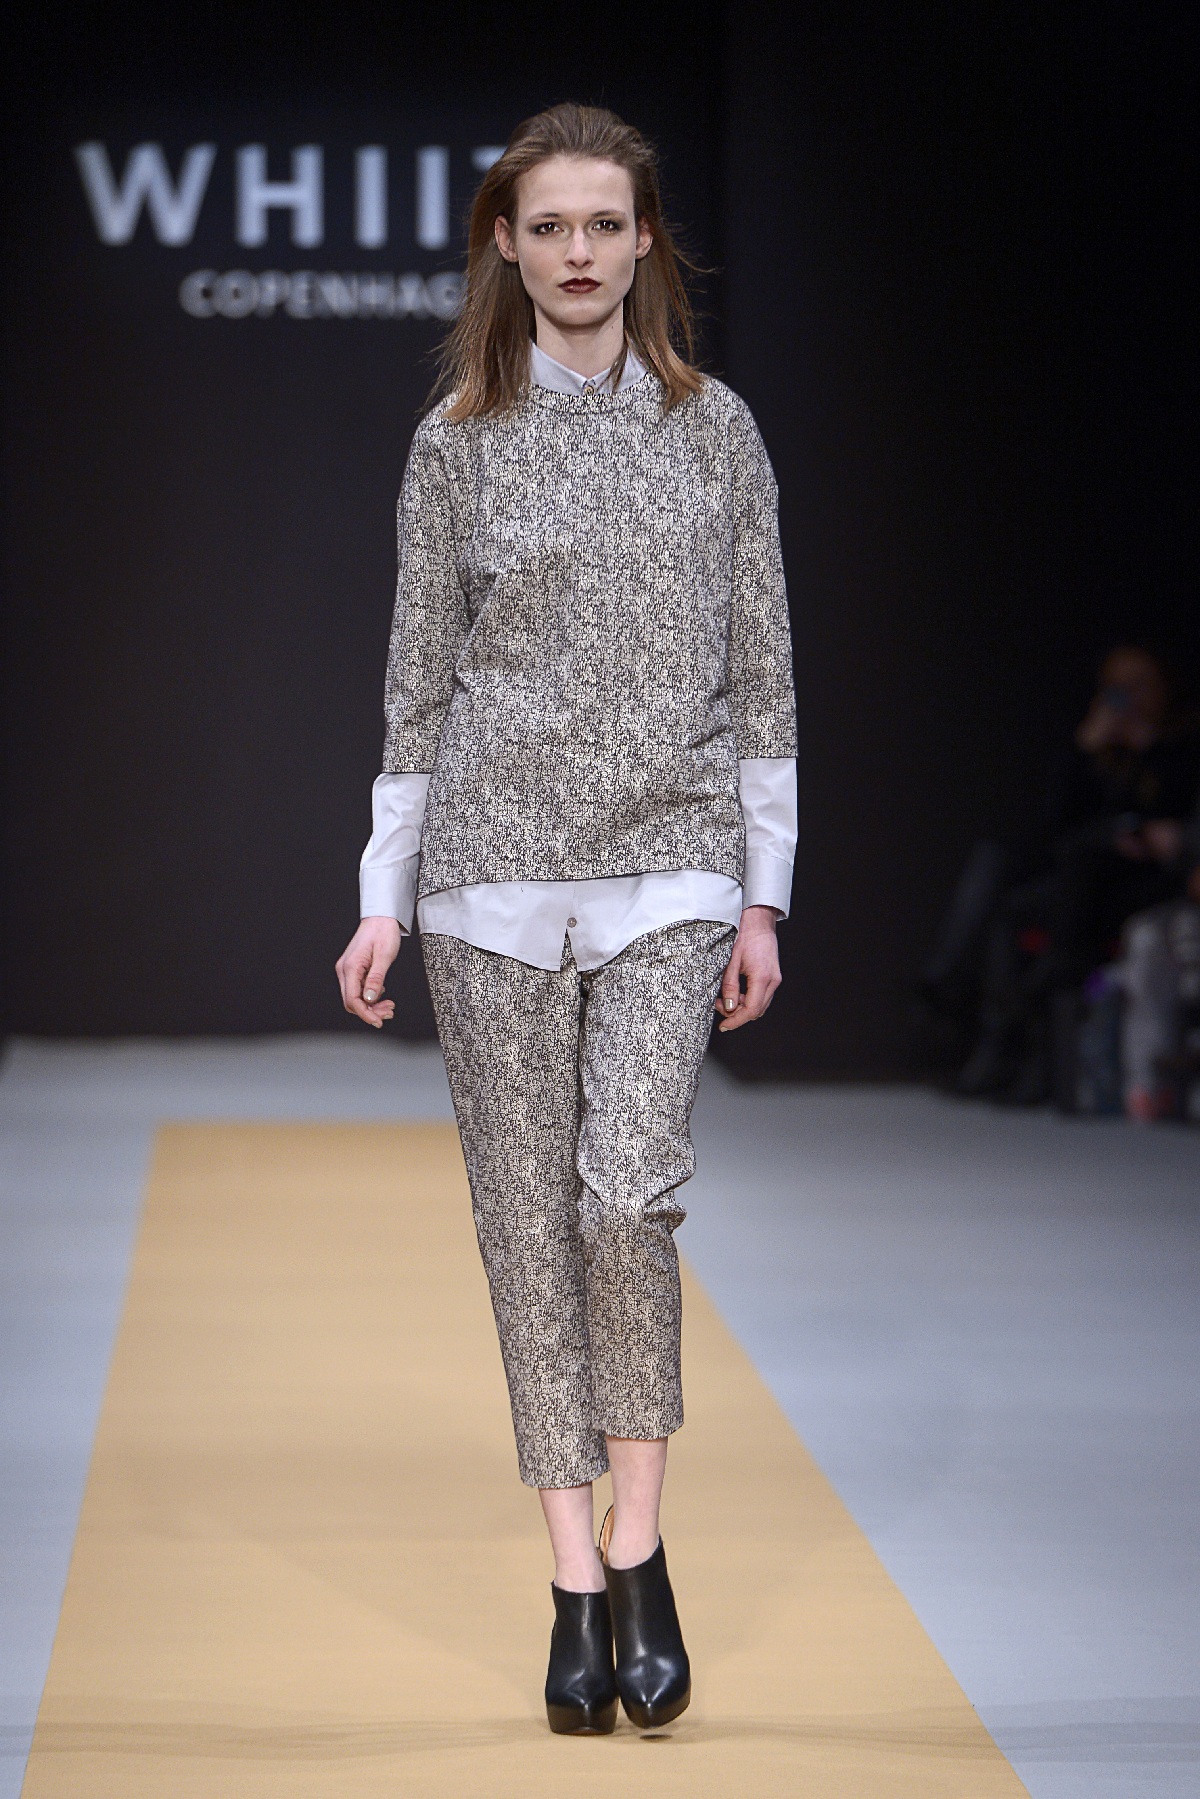 Read more about the article Copenhagen Fashion Week: Whiite AW14